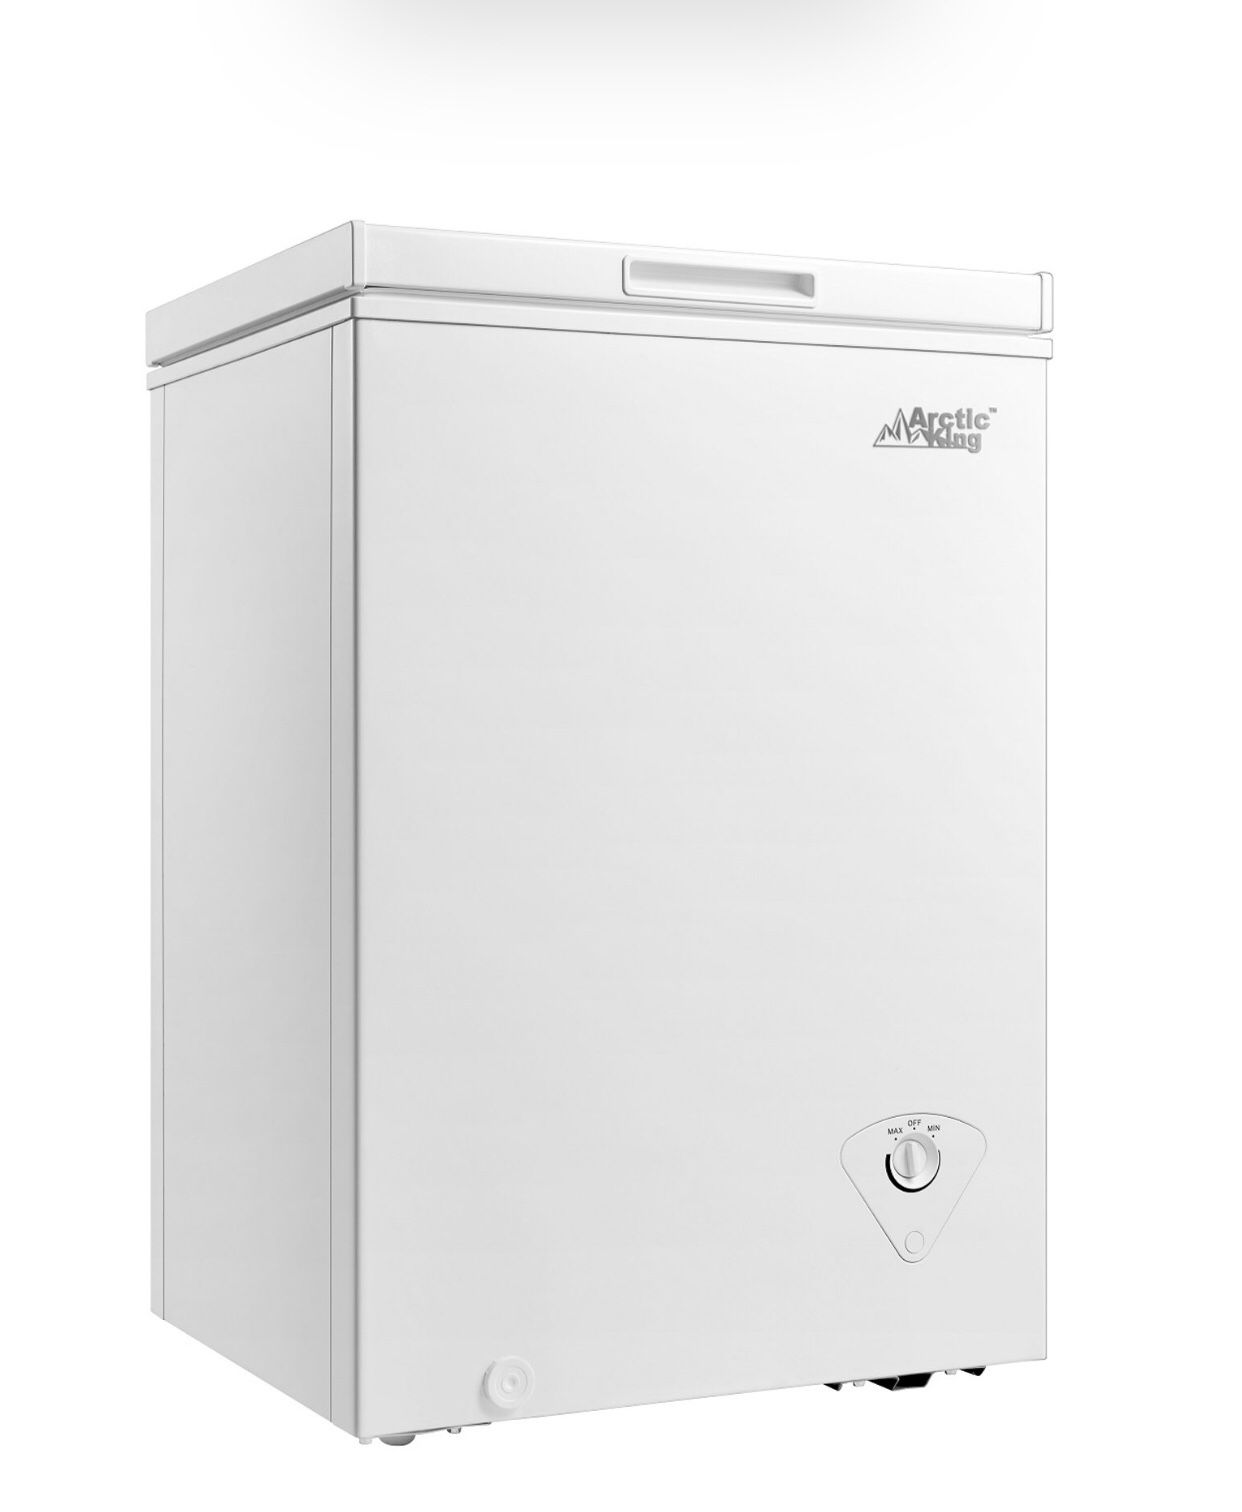 Arctic King 3.5 cu ft Chest Freezer White Sold out in hand